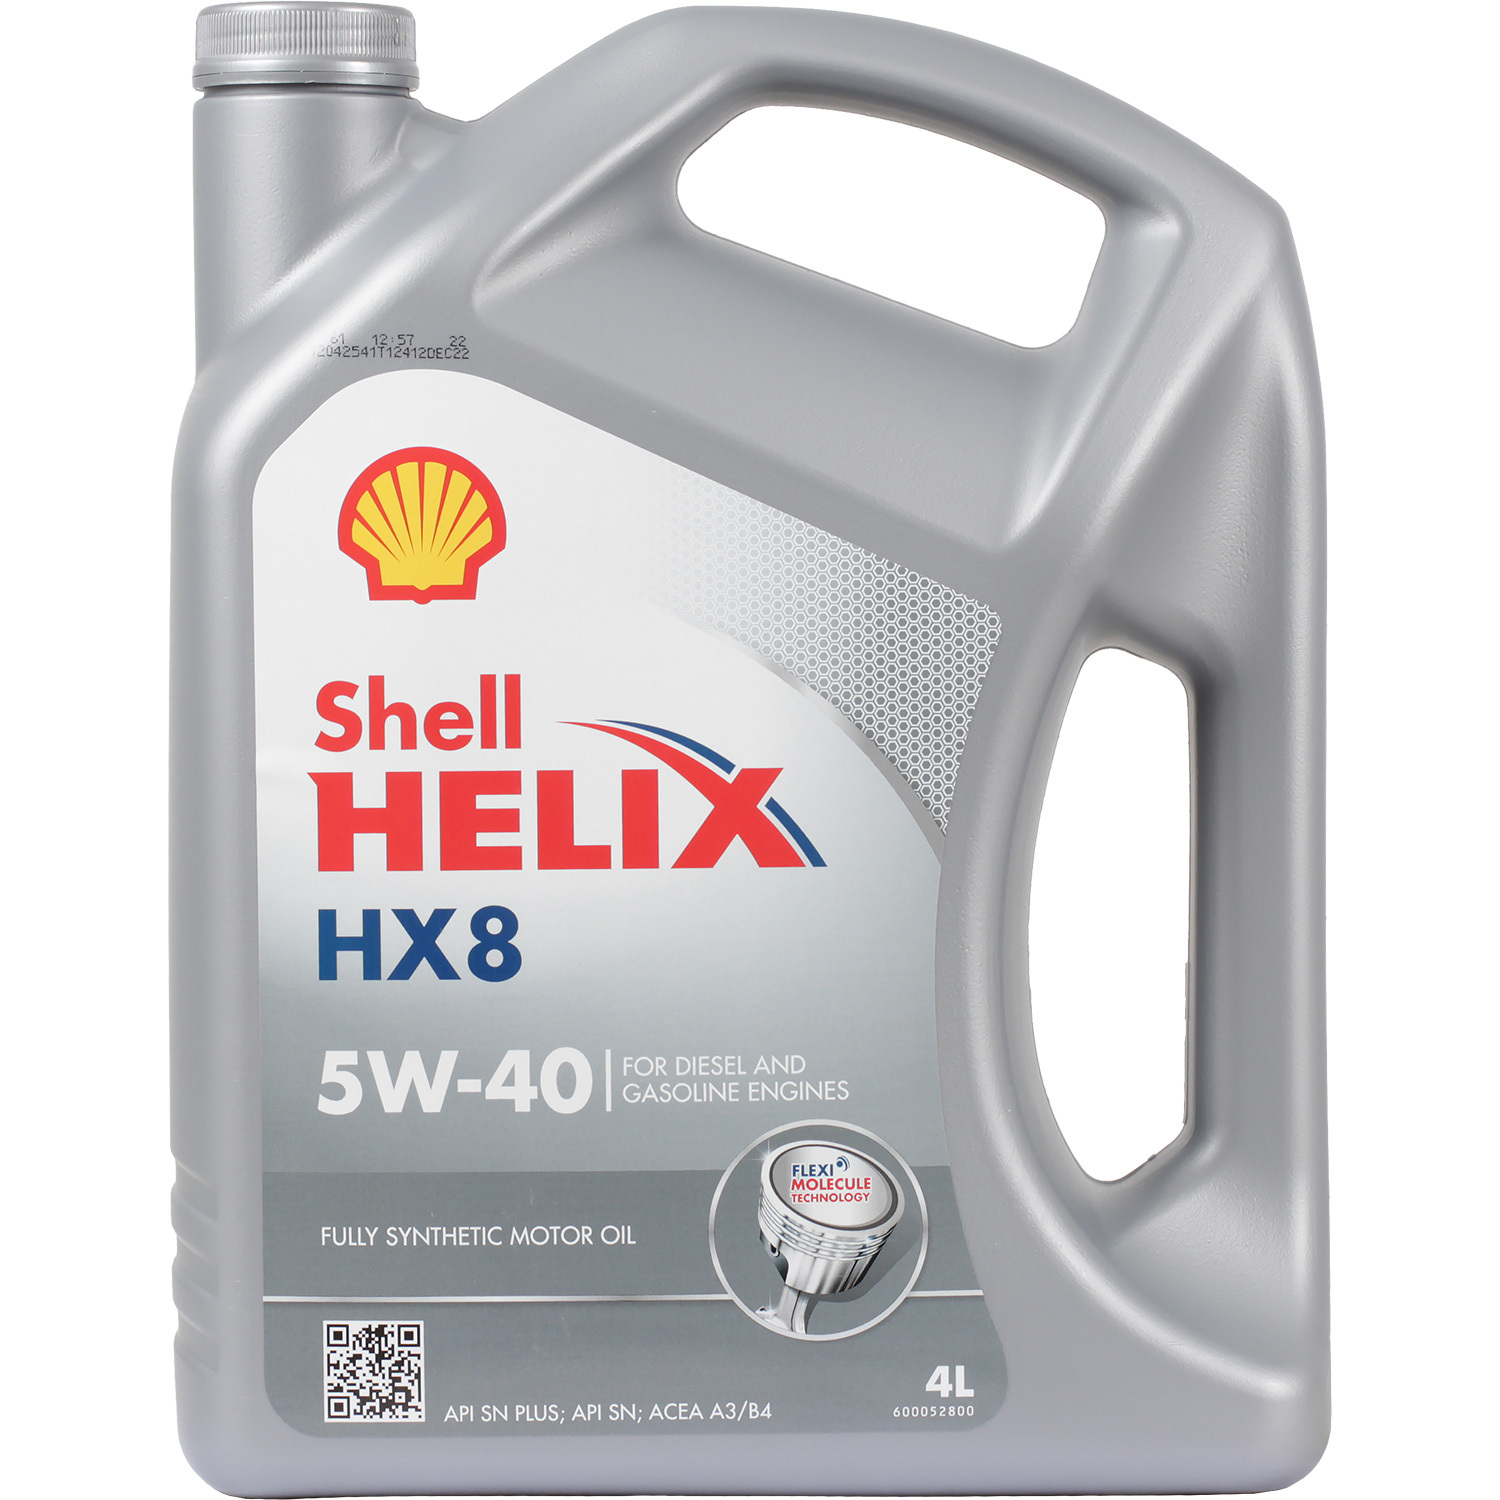 Shell Моторное масло Shell Helix HX8 5W-40, 4 л масло моторное shell helix ultra 5w 30 4 л